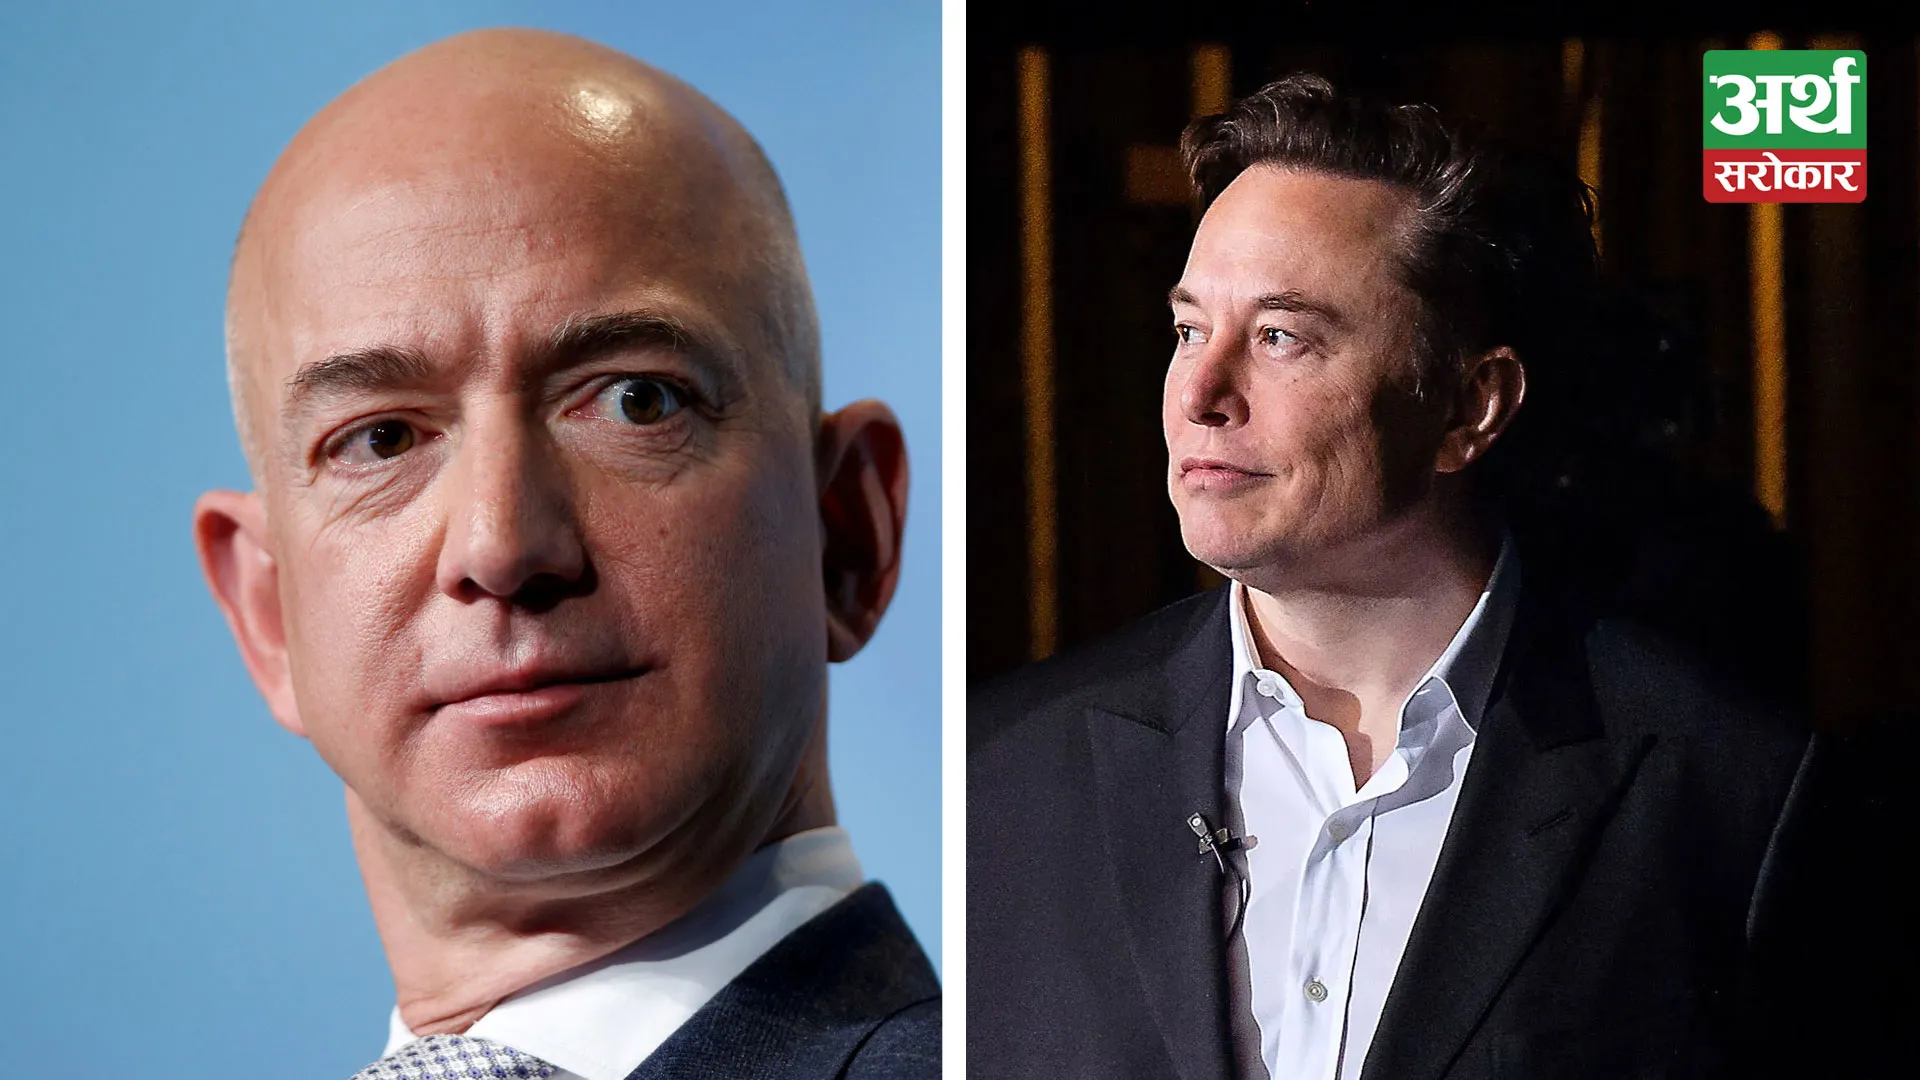 Jeff Bezos Surpasses Elon Musk to Become World’s Richest Person with $200 Billion Net Worth